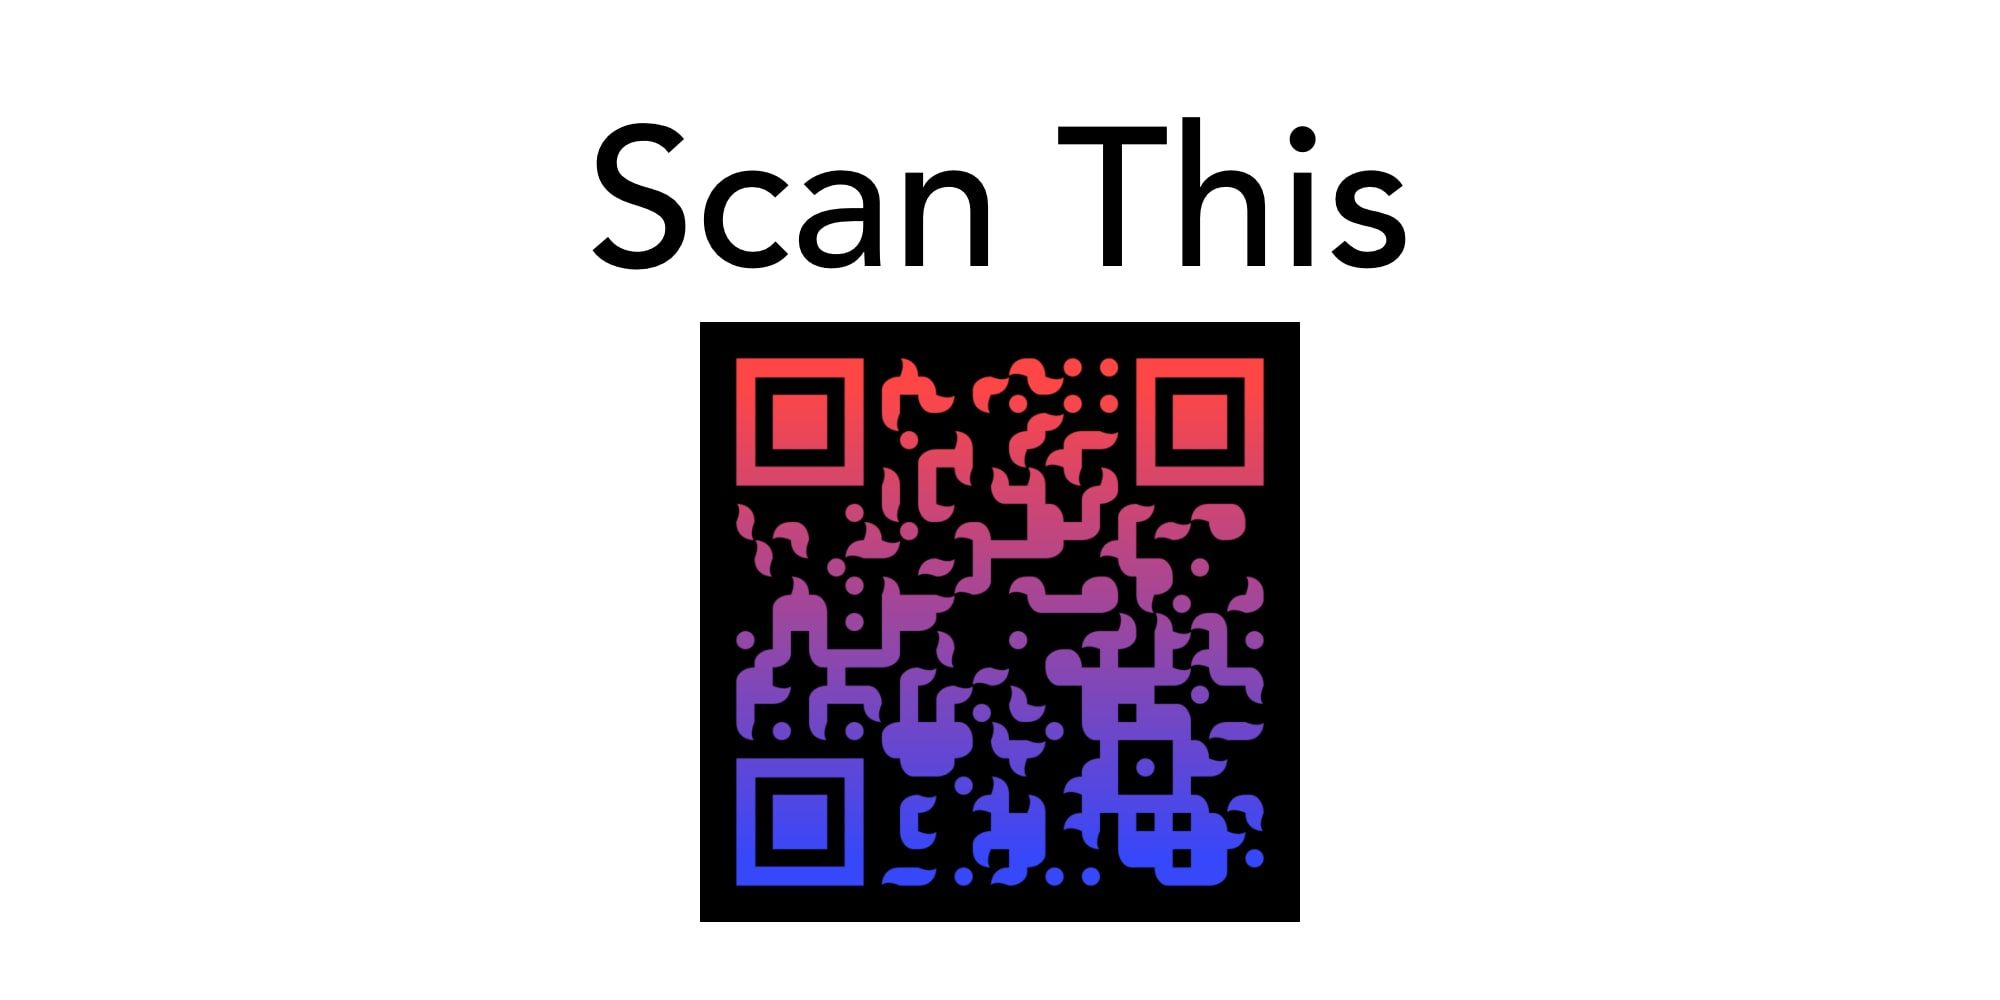 How To Safely Scan QR Codes With iPhone & Android To Avoid Nasty Scams